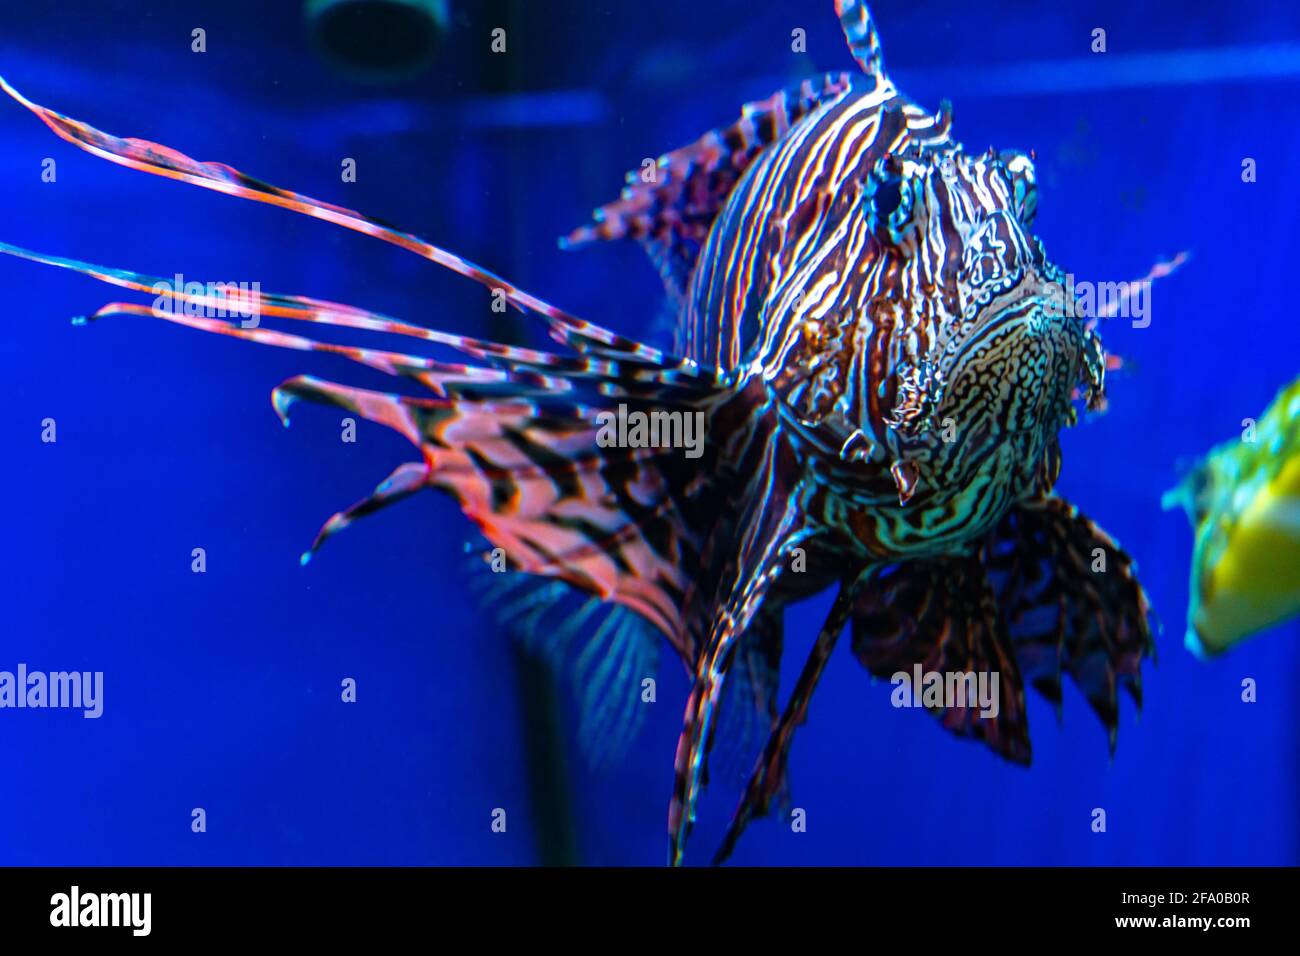 Lionfish close-up, devil-fish in water on blue background, butterfly-fish in red sea Stock Photo